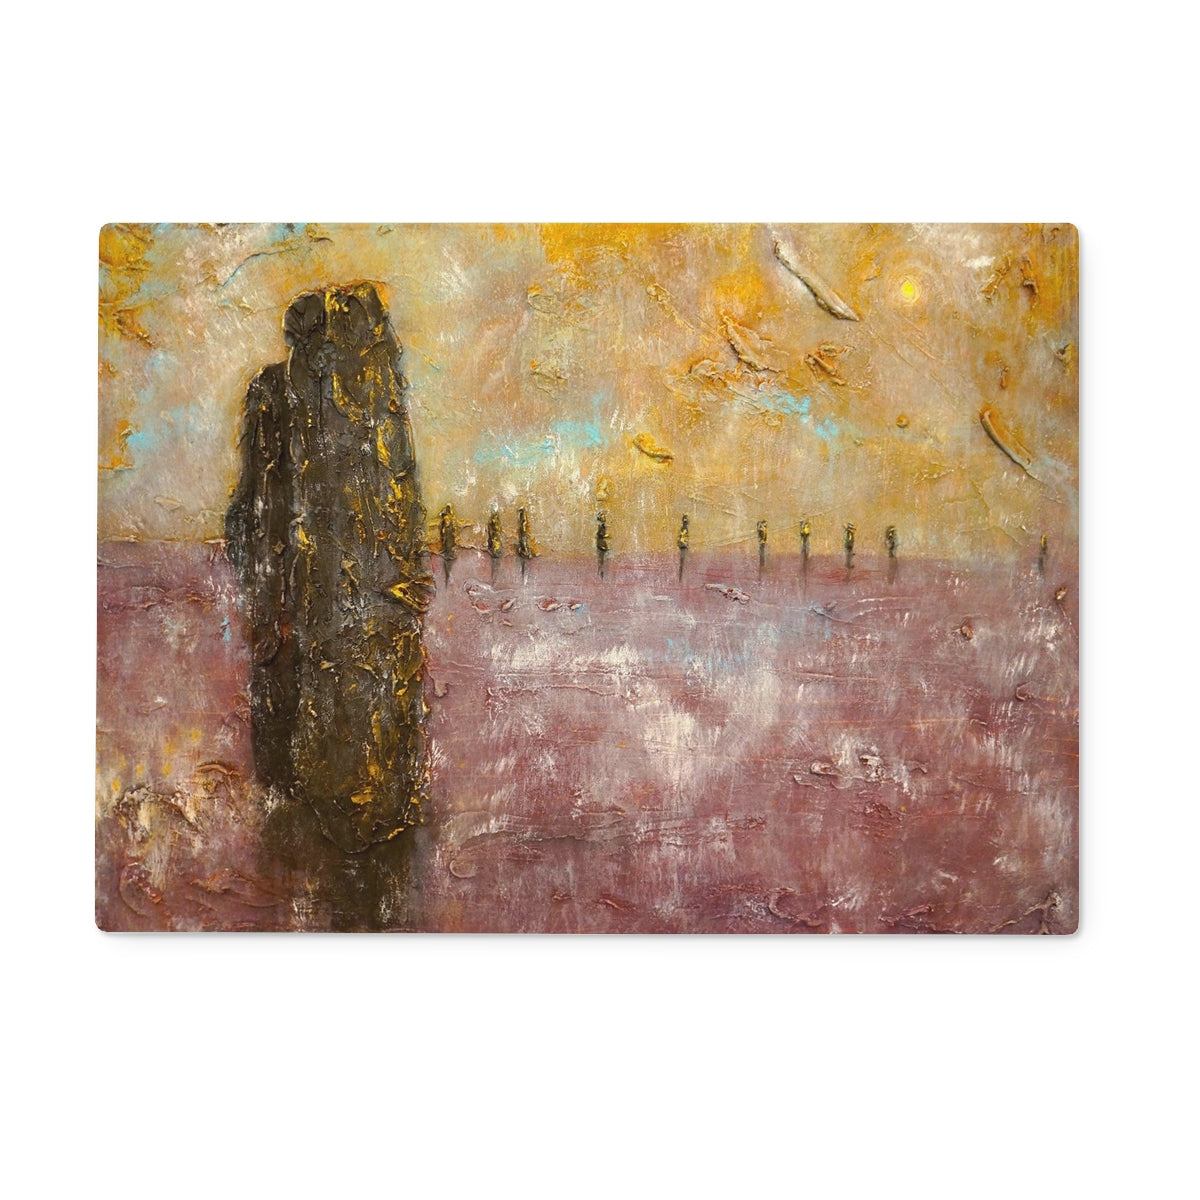 Bordgar Mist Orkney Art Gifts Glass Chopping Board-Glass Chopping Boards-Orkney Art Gallery-15"x11" Rectangular-Paintings, Prints, Homeware, Art Gifts From Scotland By Scottish Artist Kevin Hunter